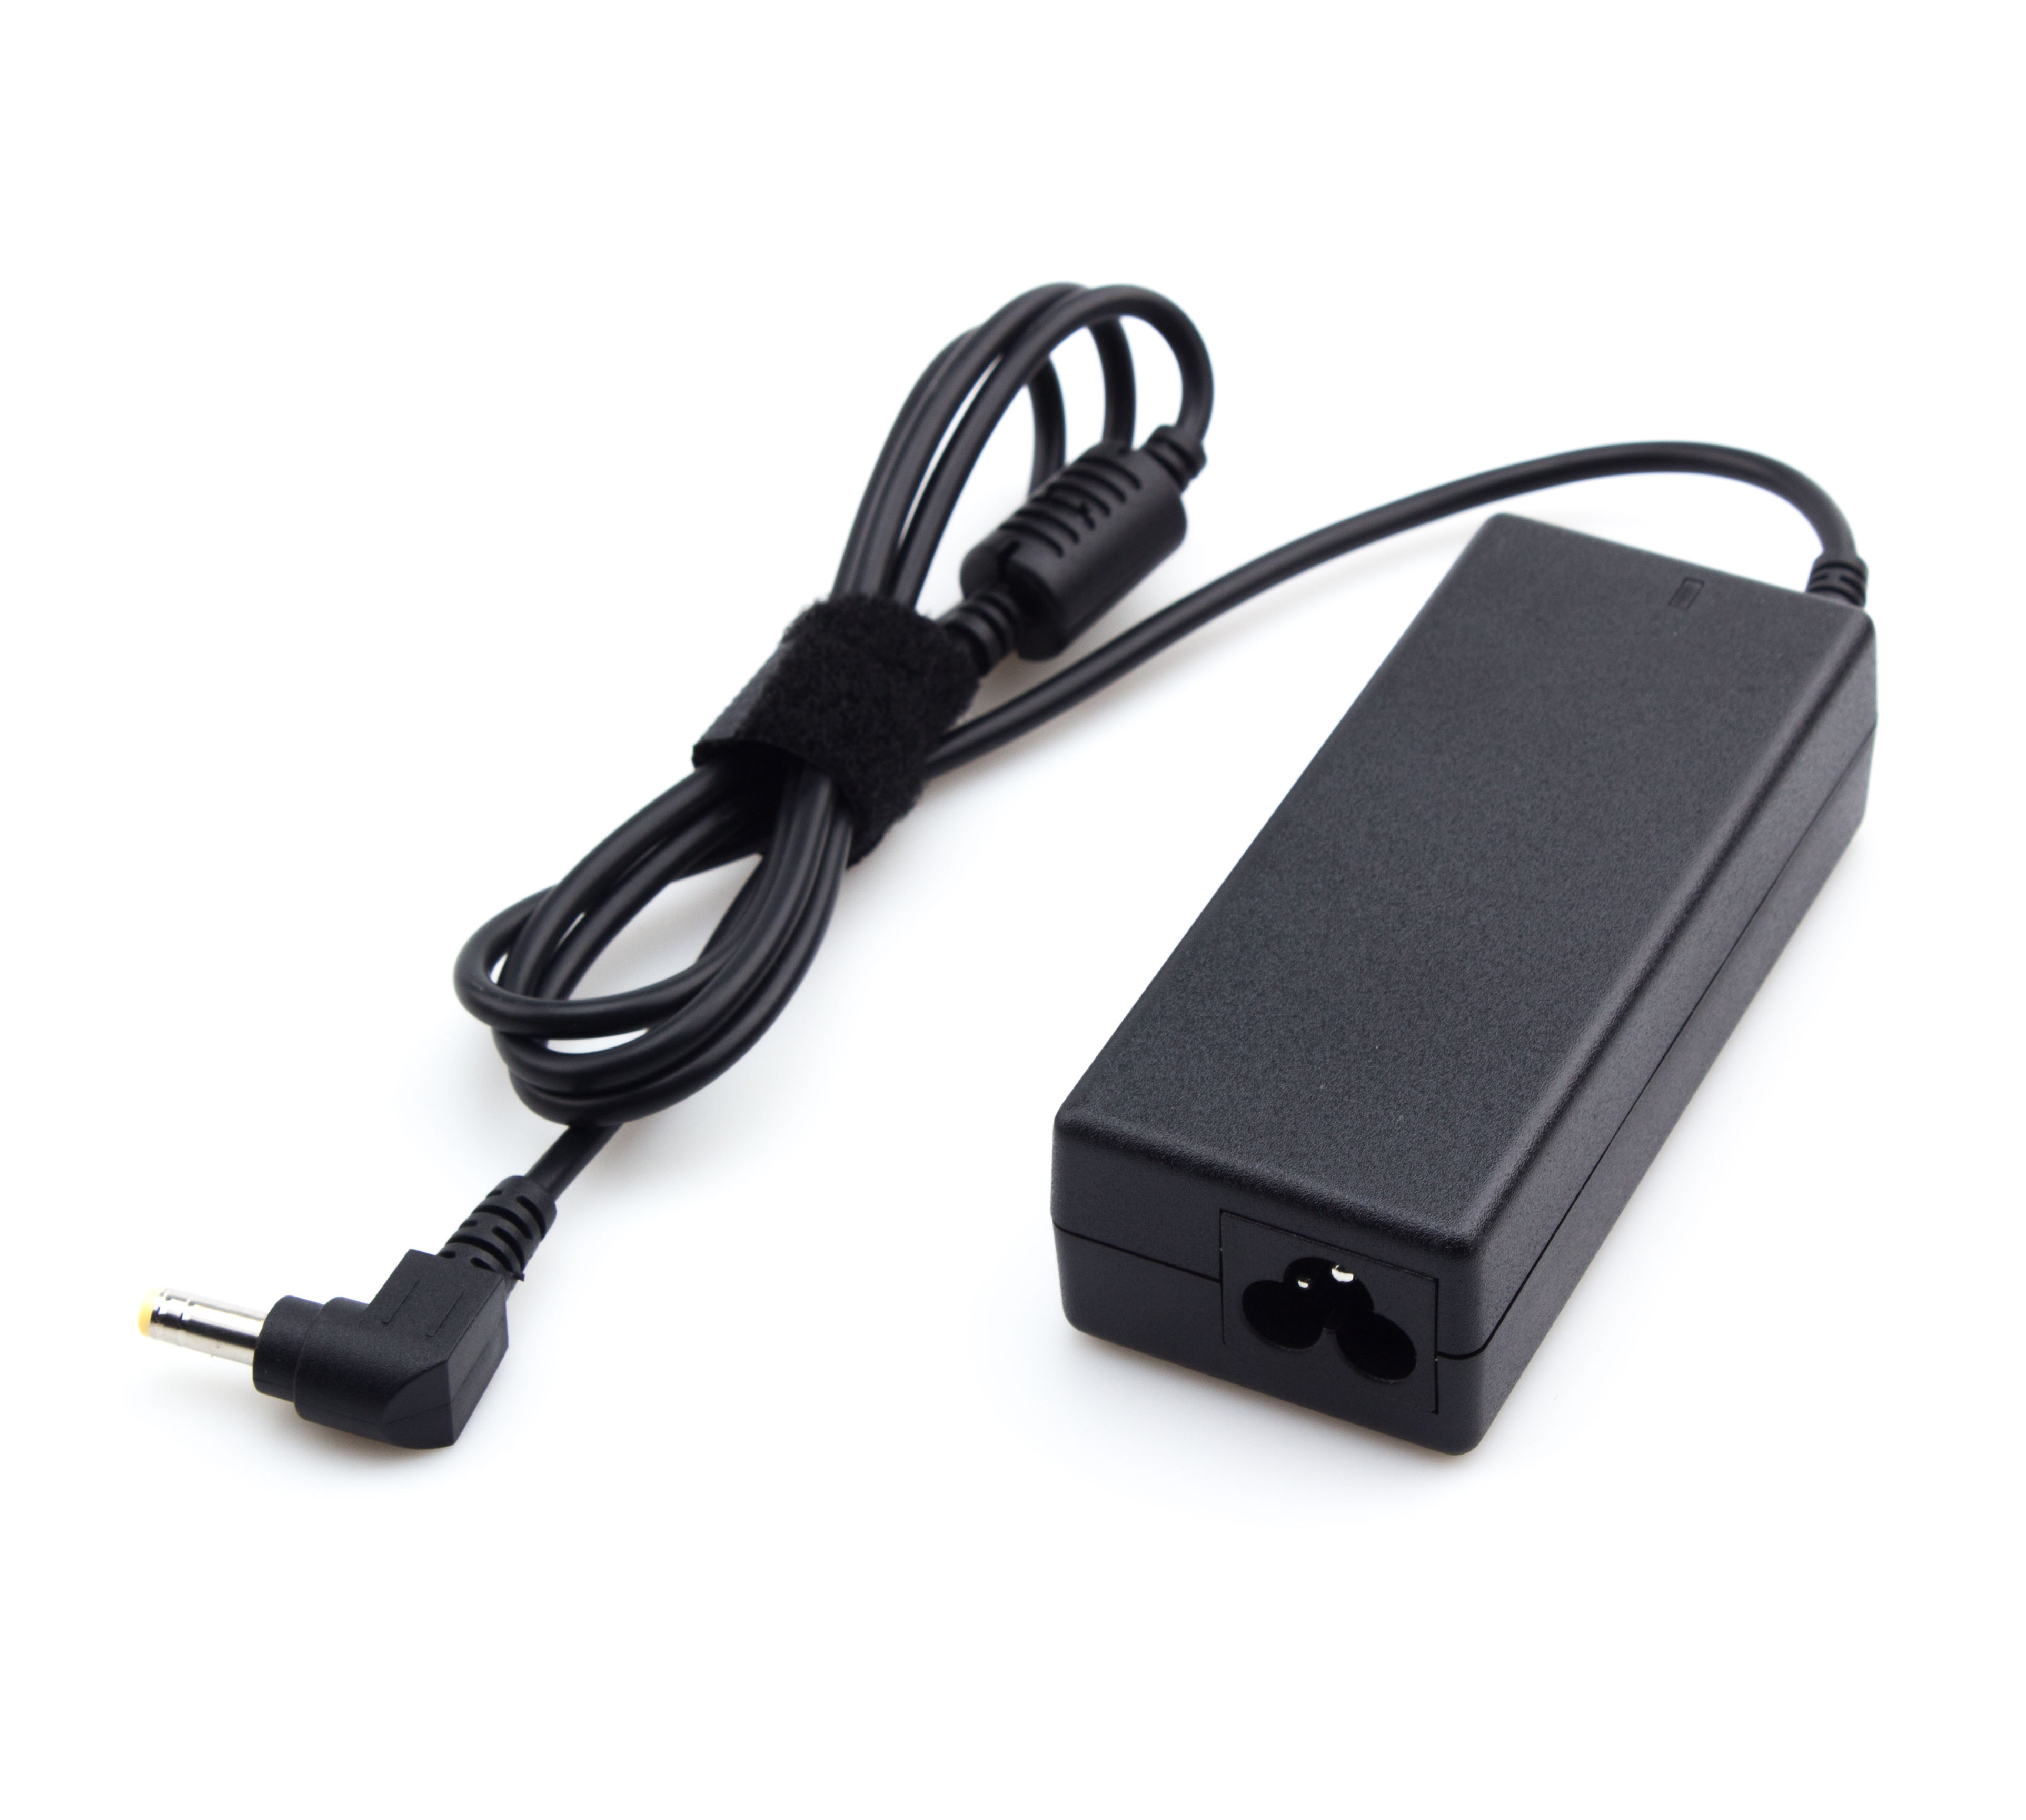 19V AC DC Adapter Charger for JBL Boombox Bluetooth Waterproof Speaker Replacement Power Supply Cord Xtreme, Xtreme 2 65W Charger Cable - Walmart.com